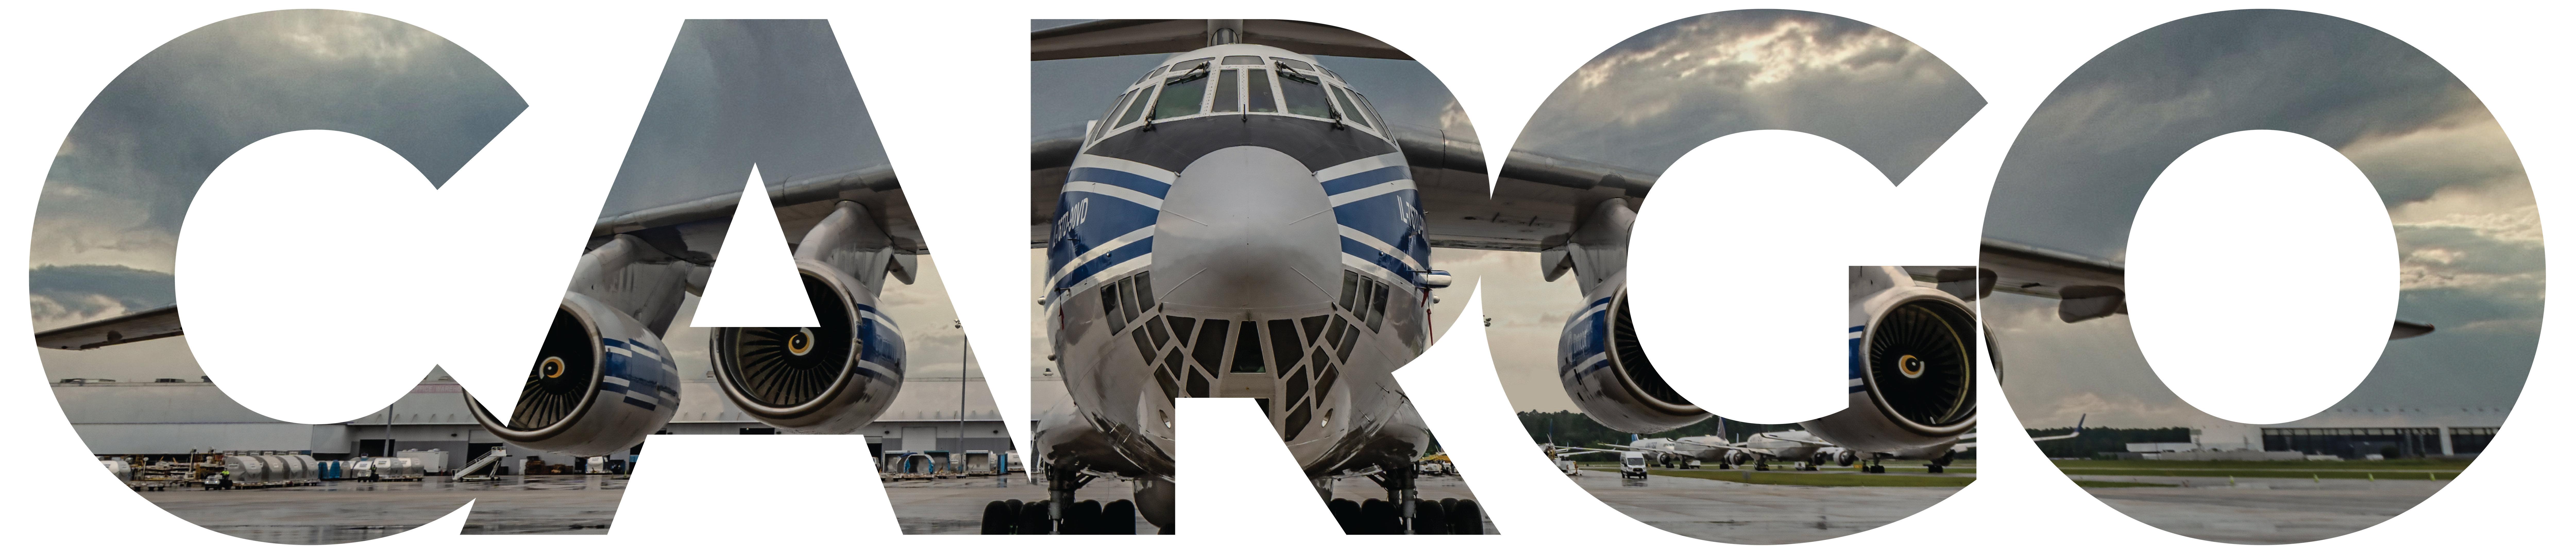 Air Cargo Cut Out image